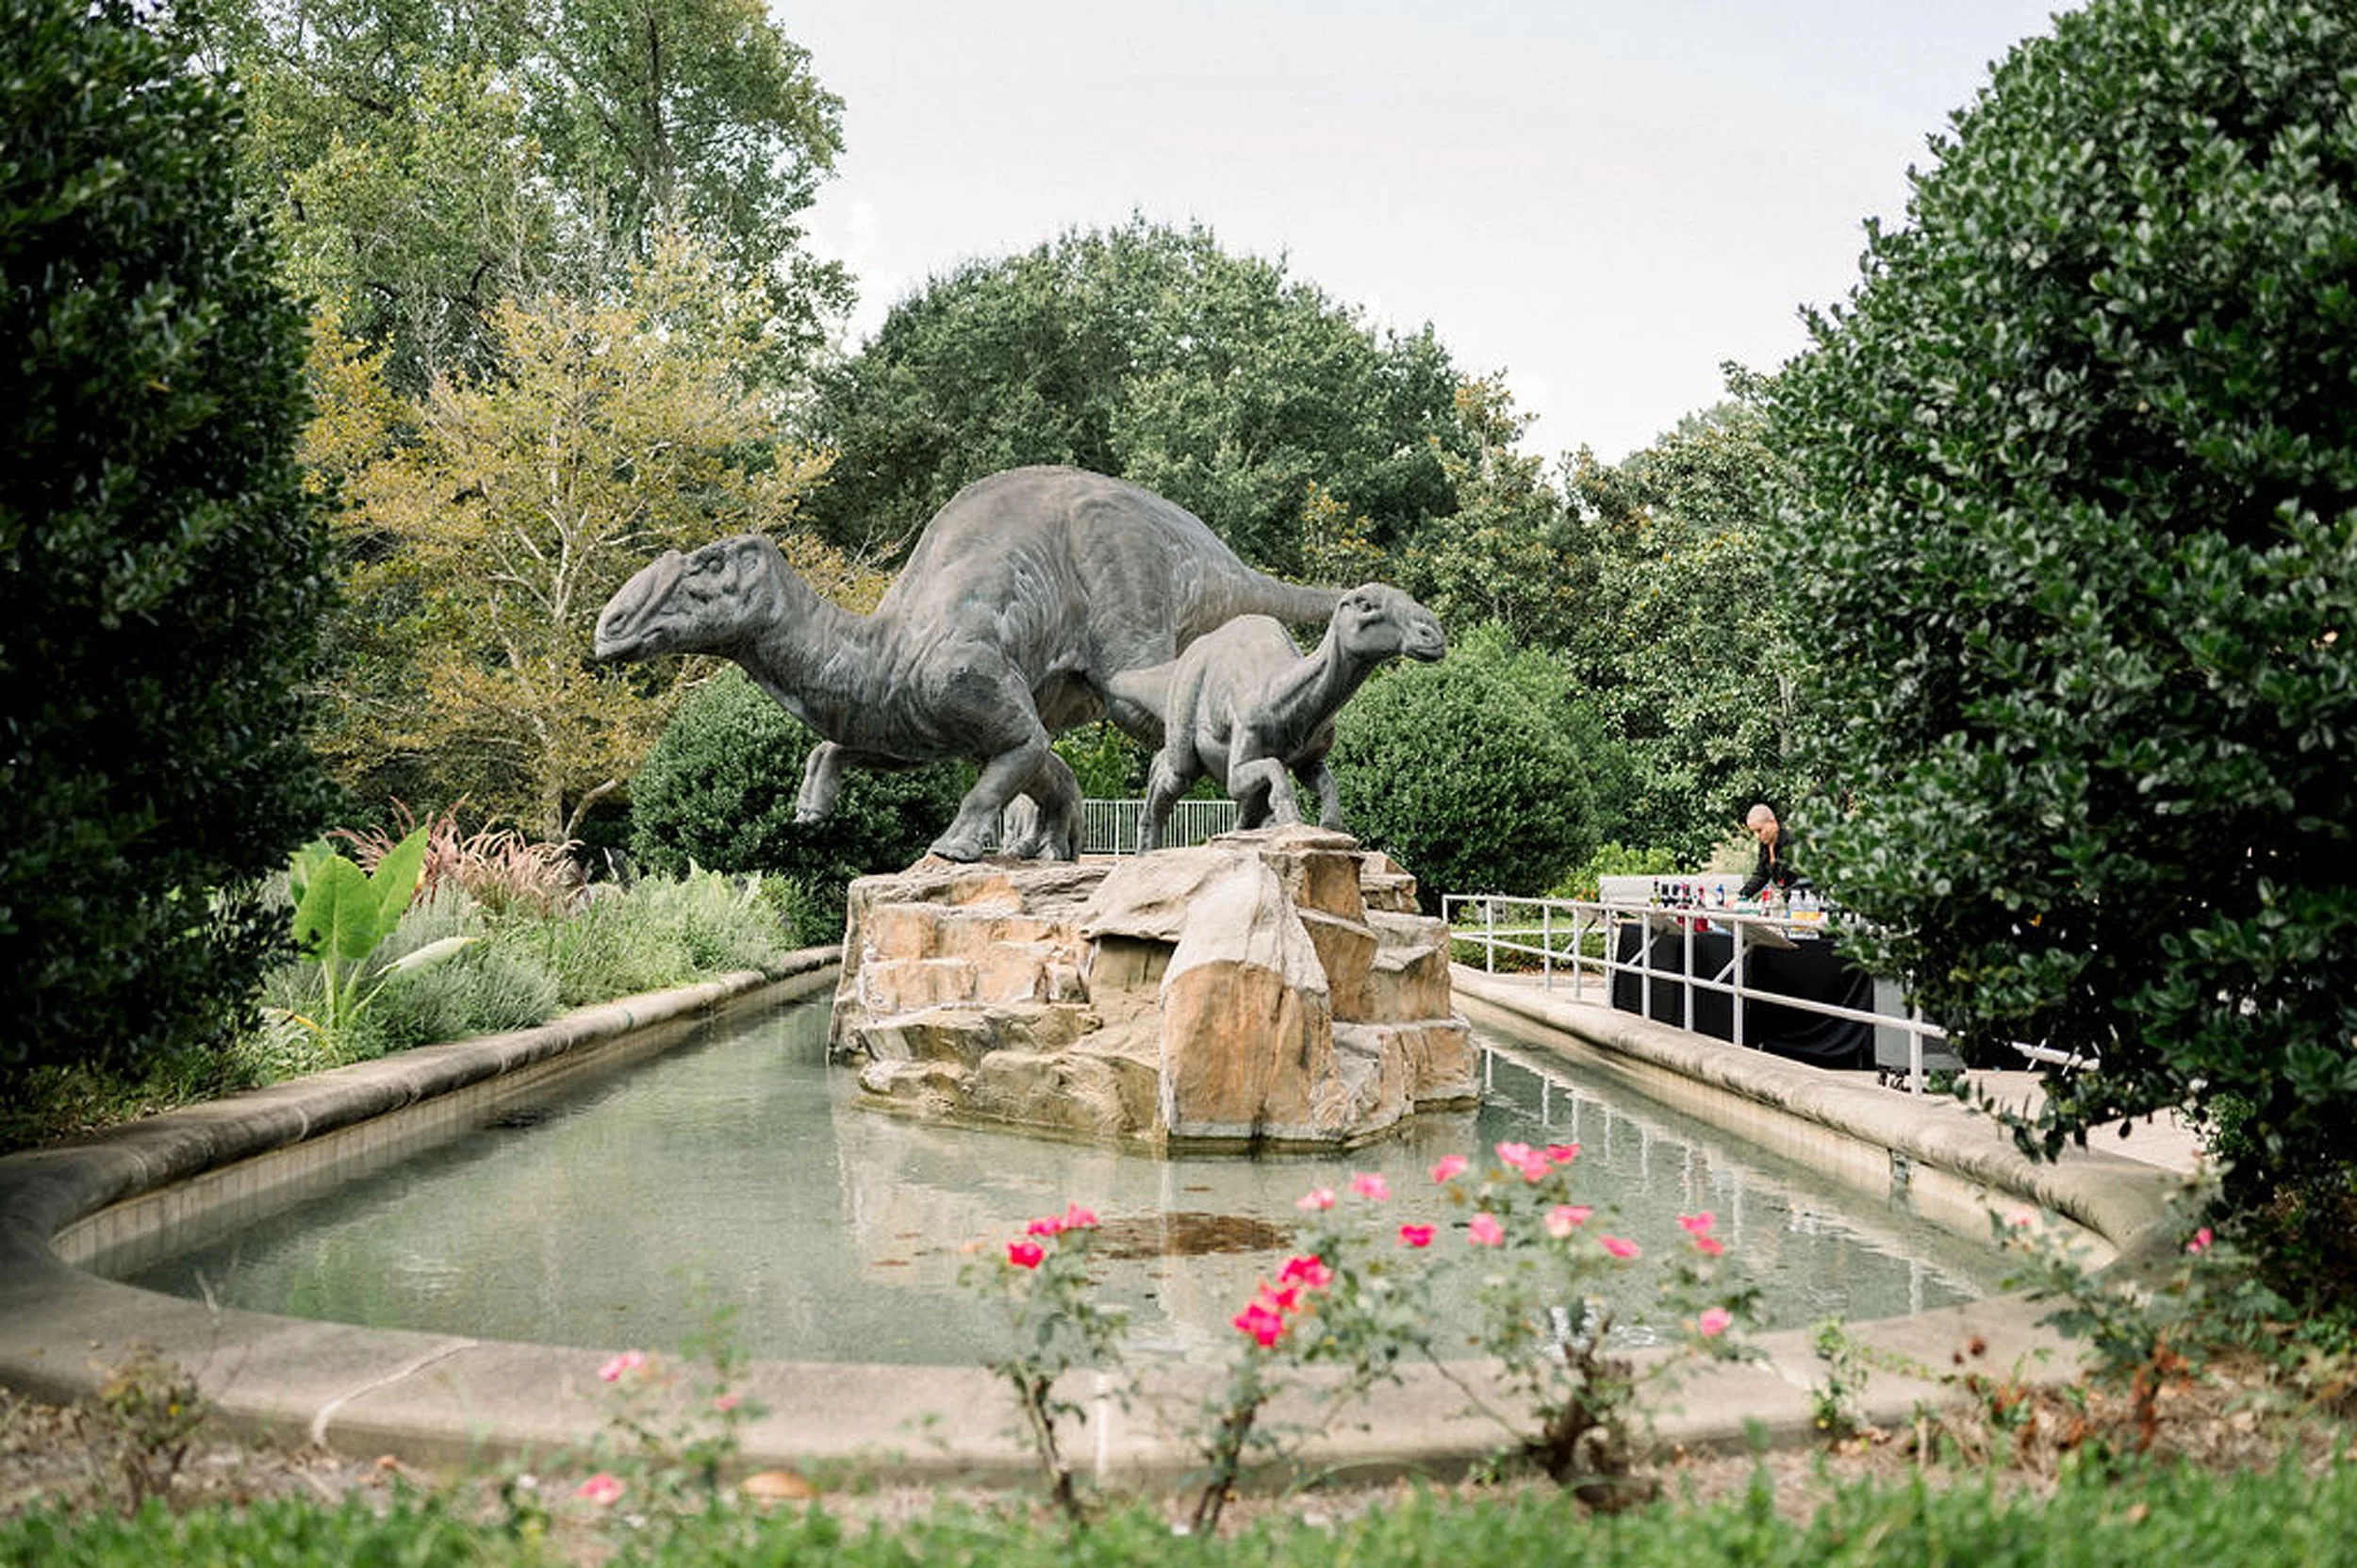 Details of dinosaur statues in a pond in a garden at a museum